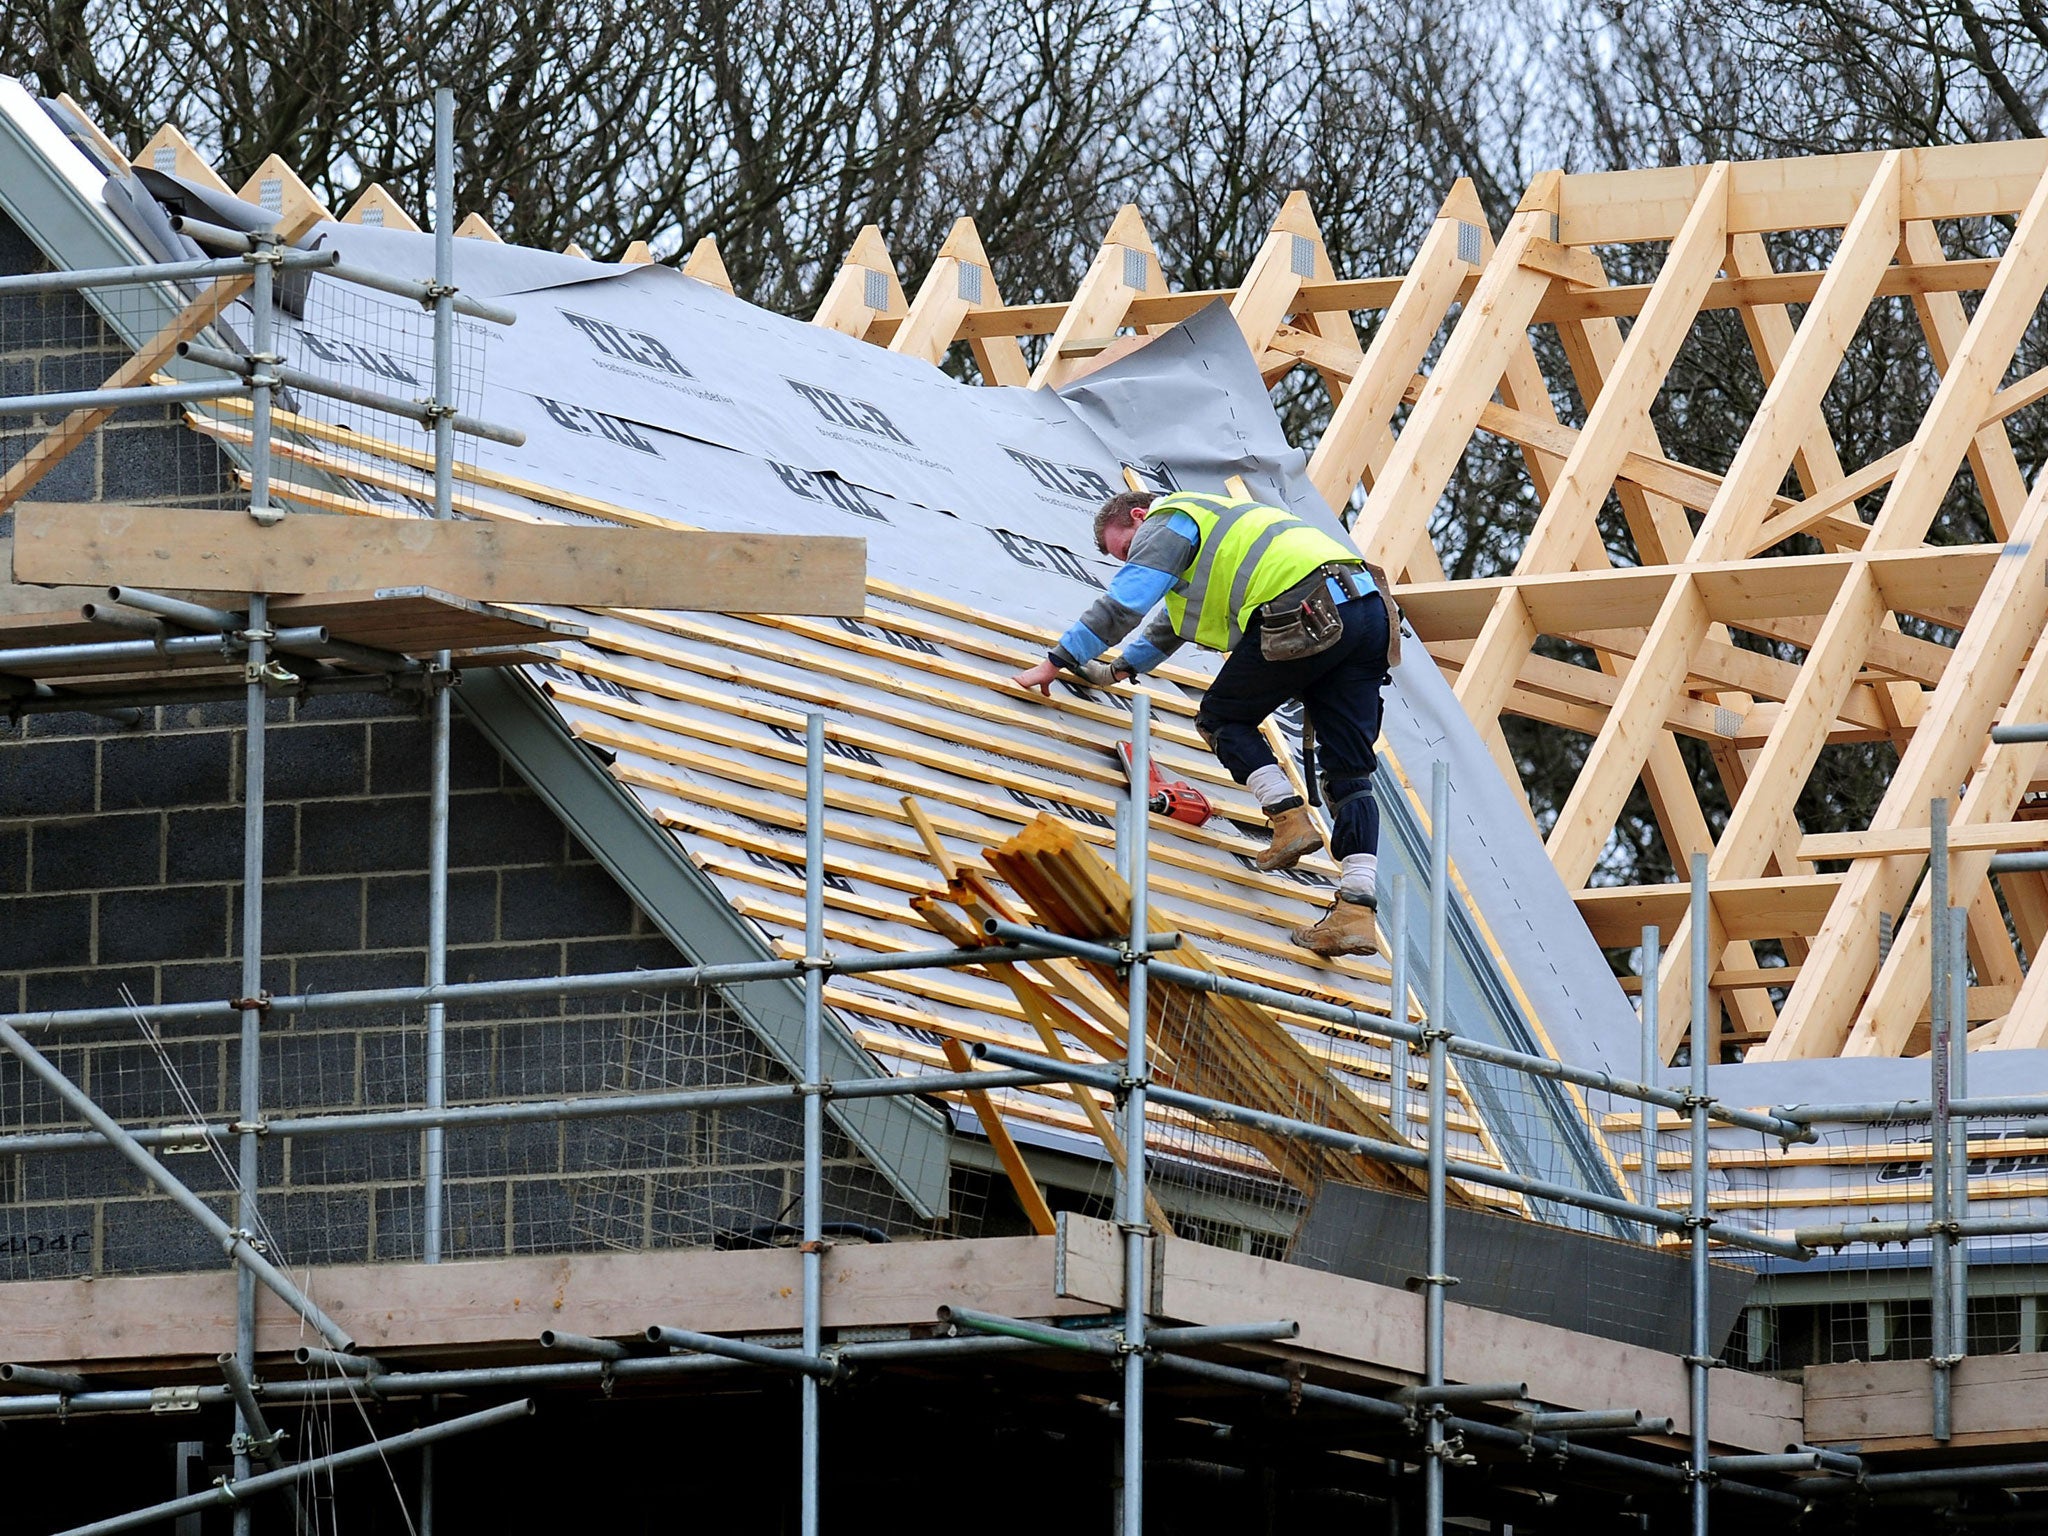 Only 107,950 homes were constructed in 2012-13